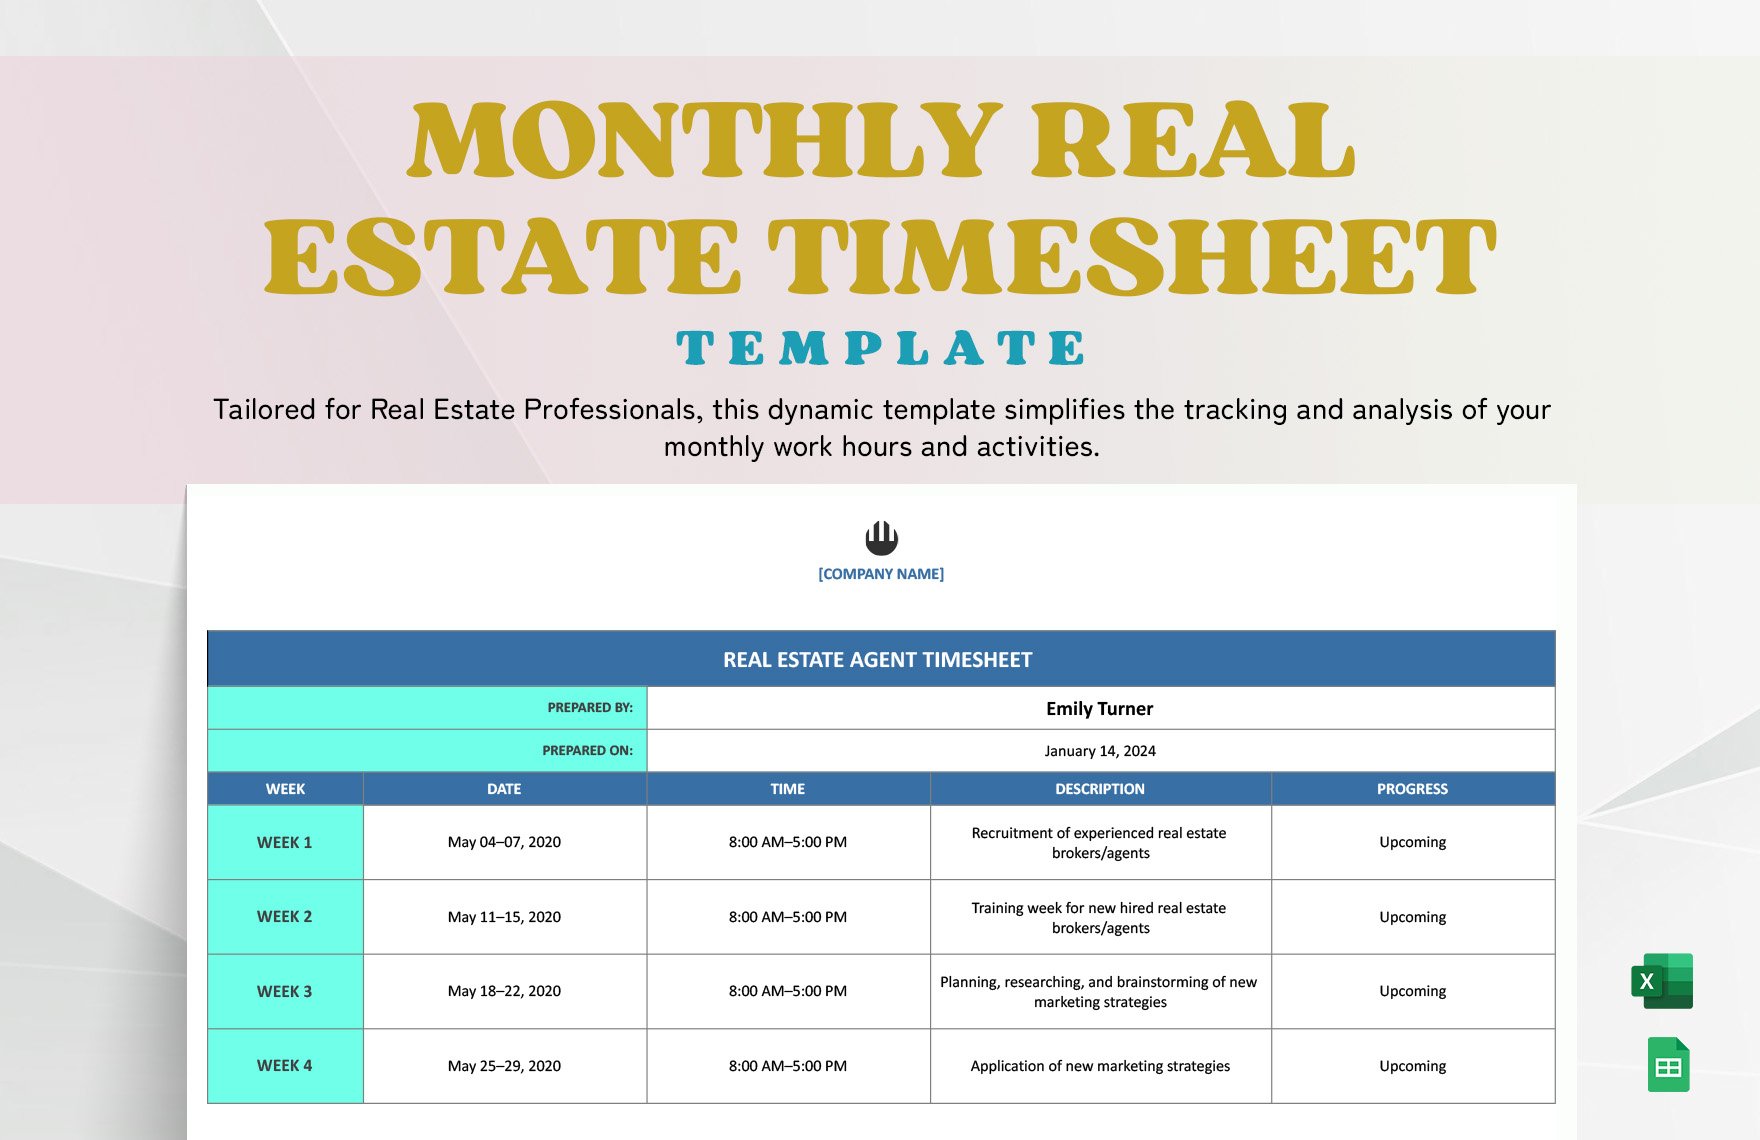 Monthly Real Estate Timesheet Template in Word, Google Docs, Excel, PDF, Google Sheets, Apple Numbers